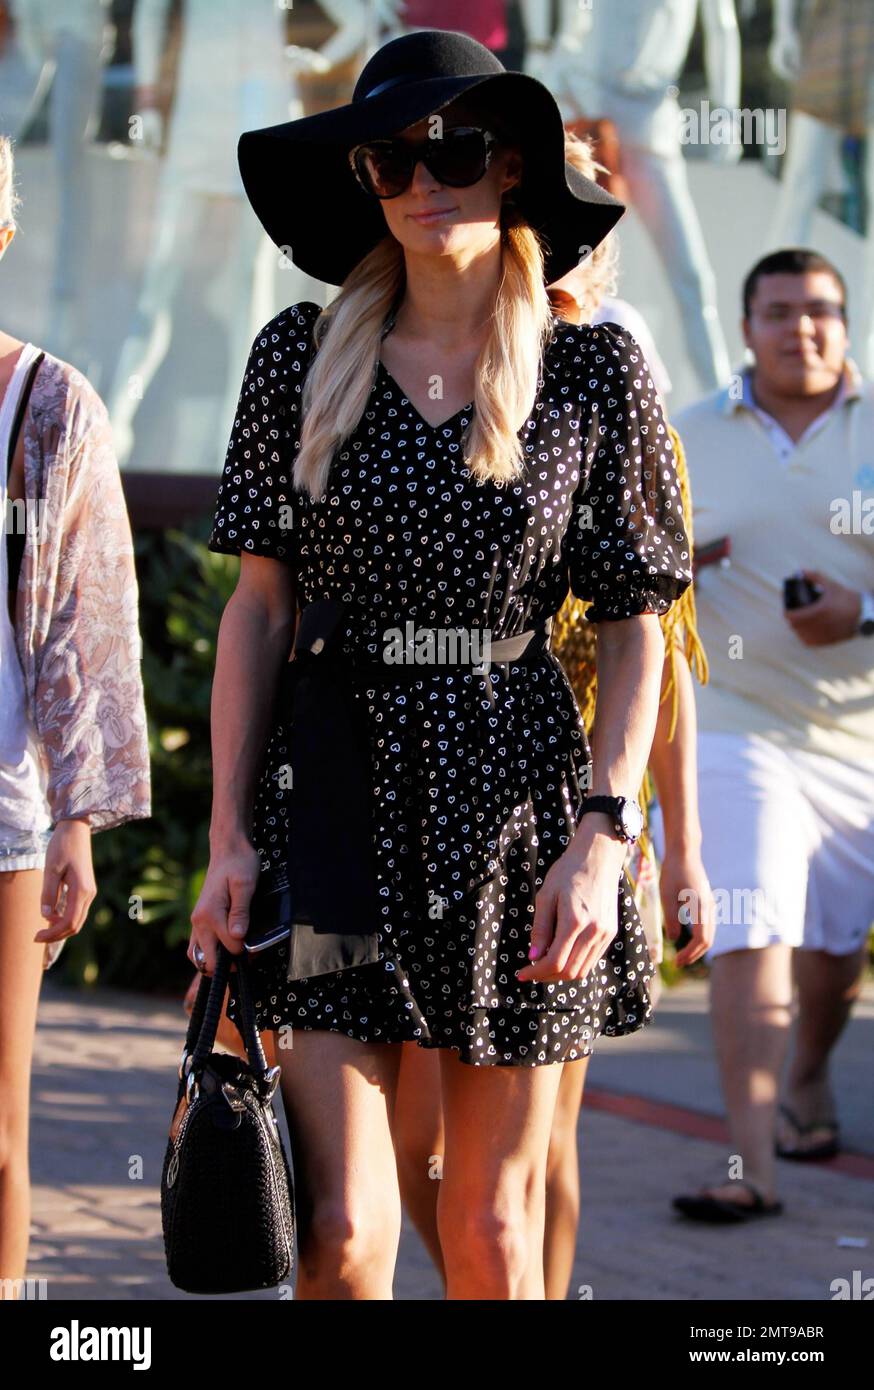 Paris Hilton Shopping in West Hollywood October 21, 2009 – Star Style